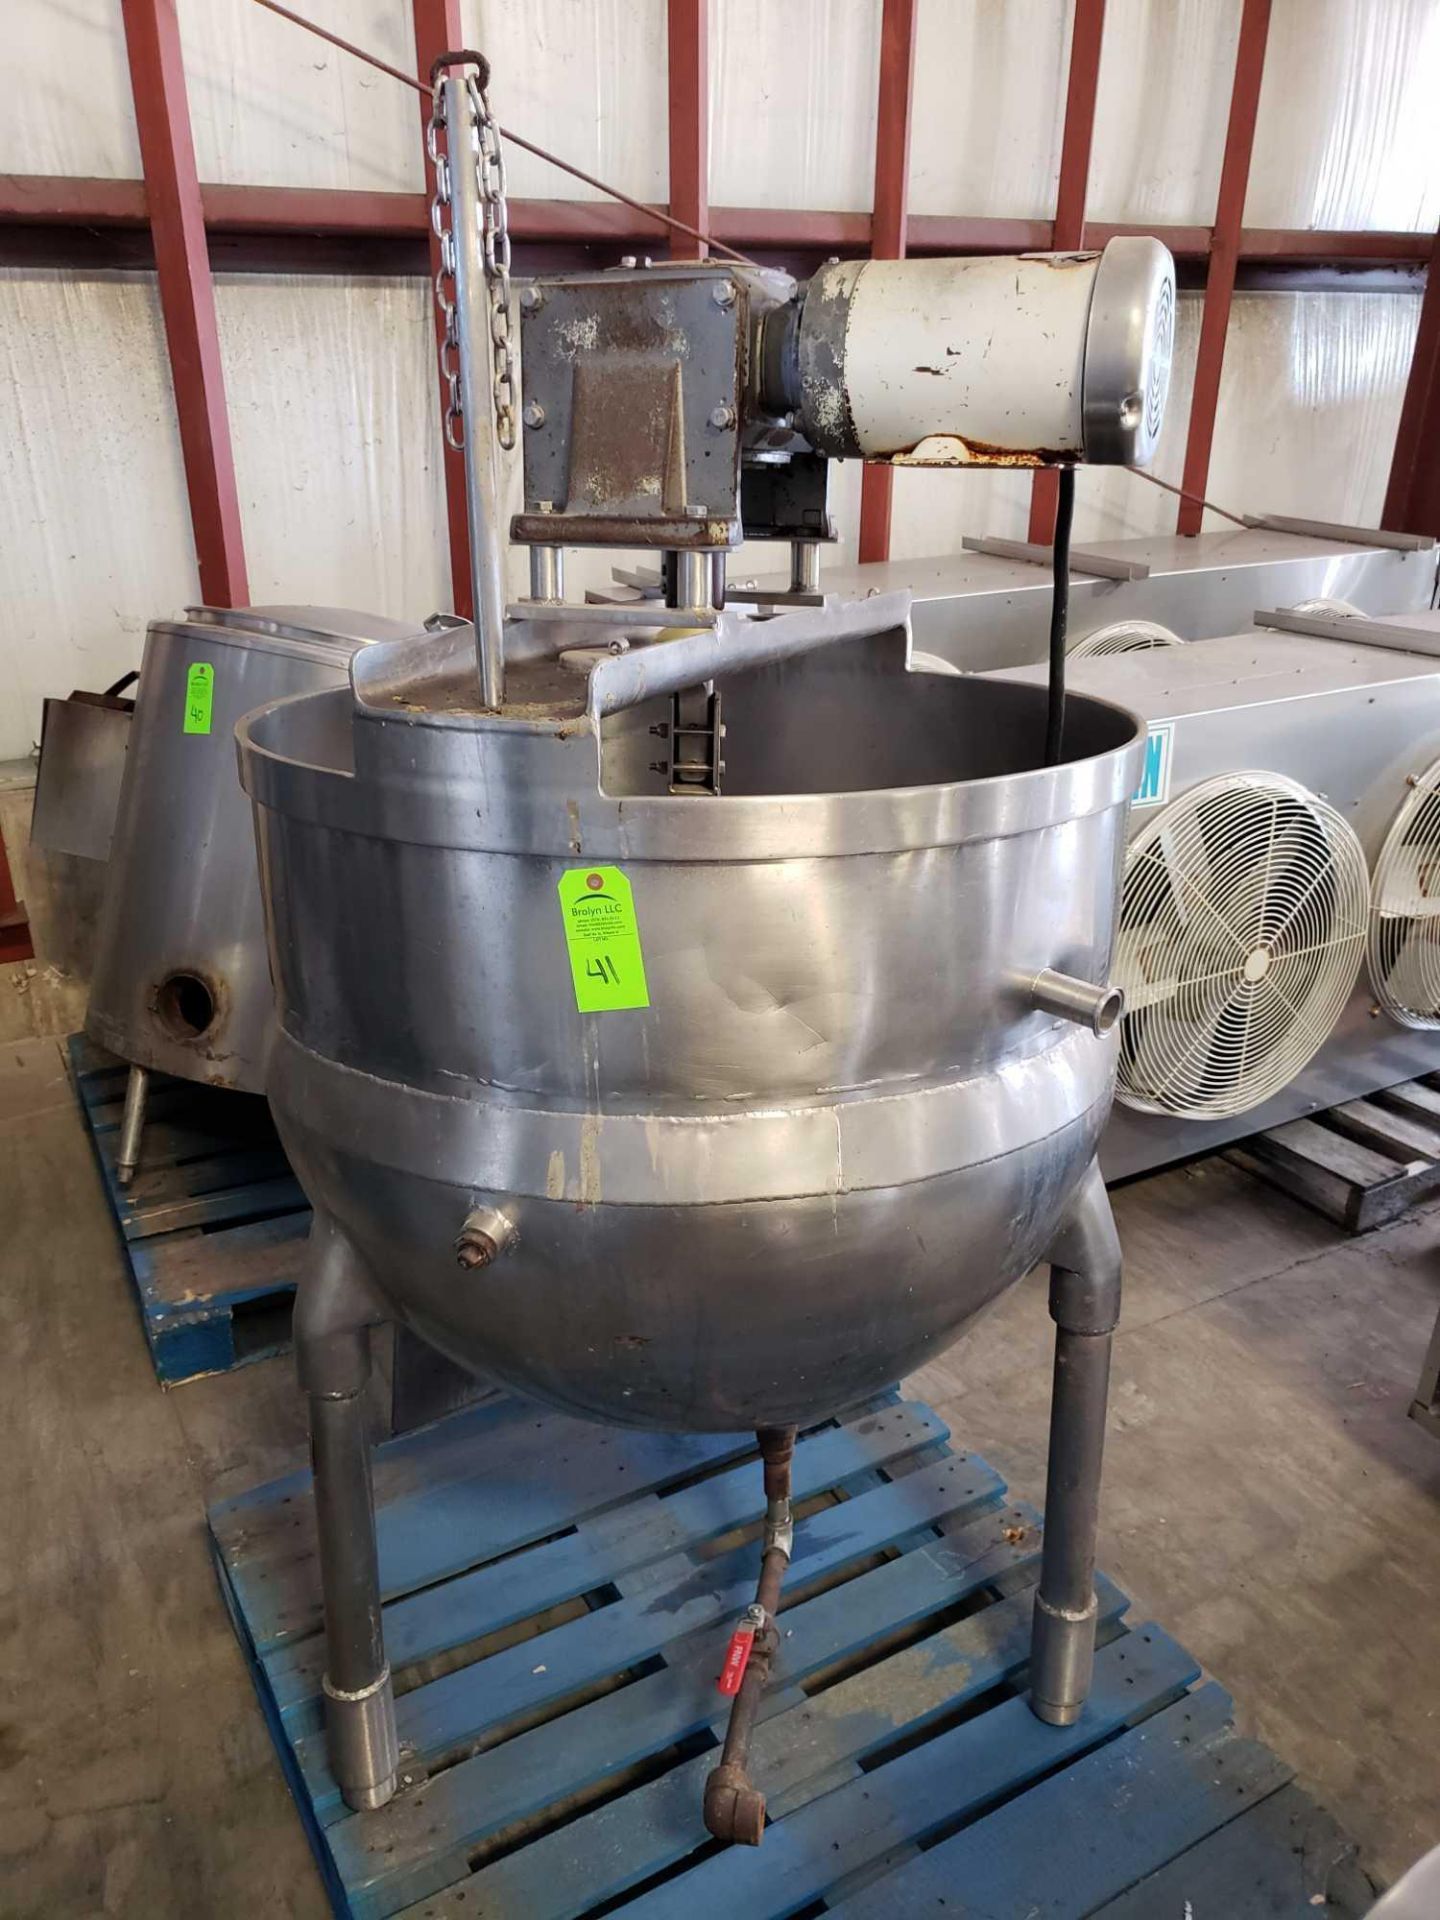 Groen 1X stainless steel mixing kettle. Dimensions of kettle 40" diameter x 30" deep interior. - Image 2 of 11